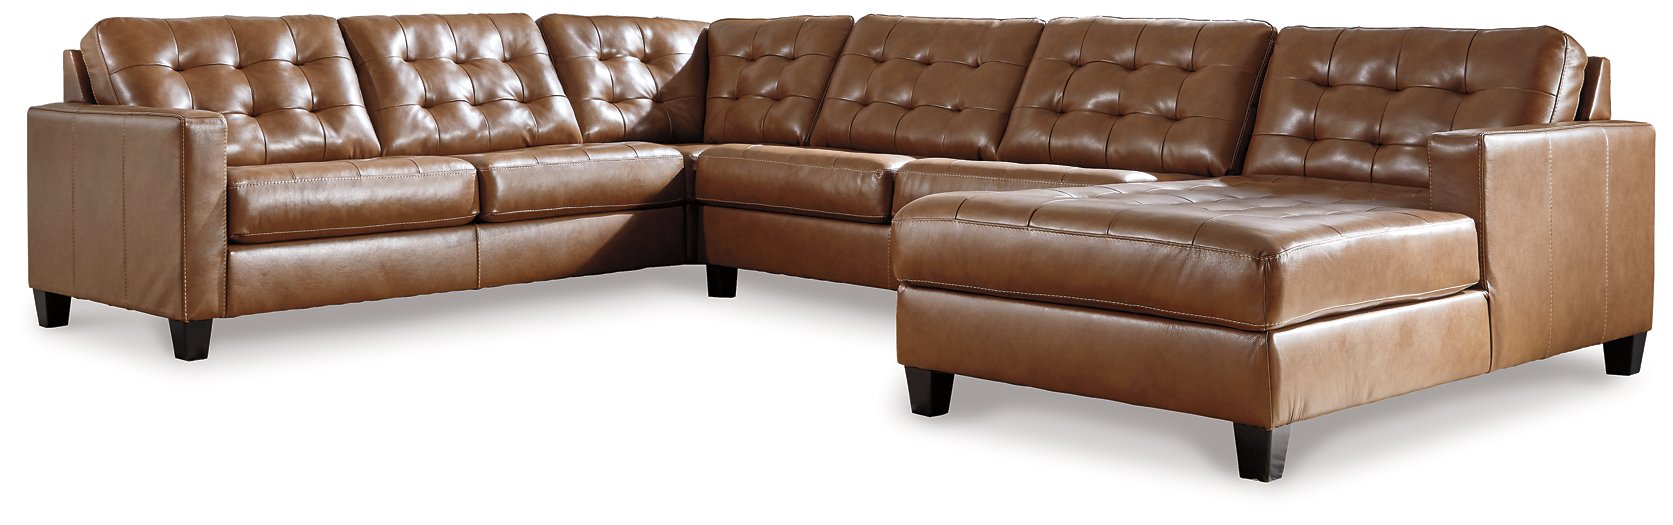 Baskove Sectional with Chaise - Evans Furniture (CO)